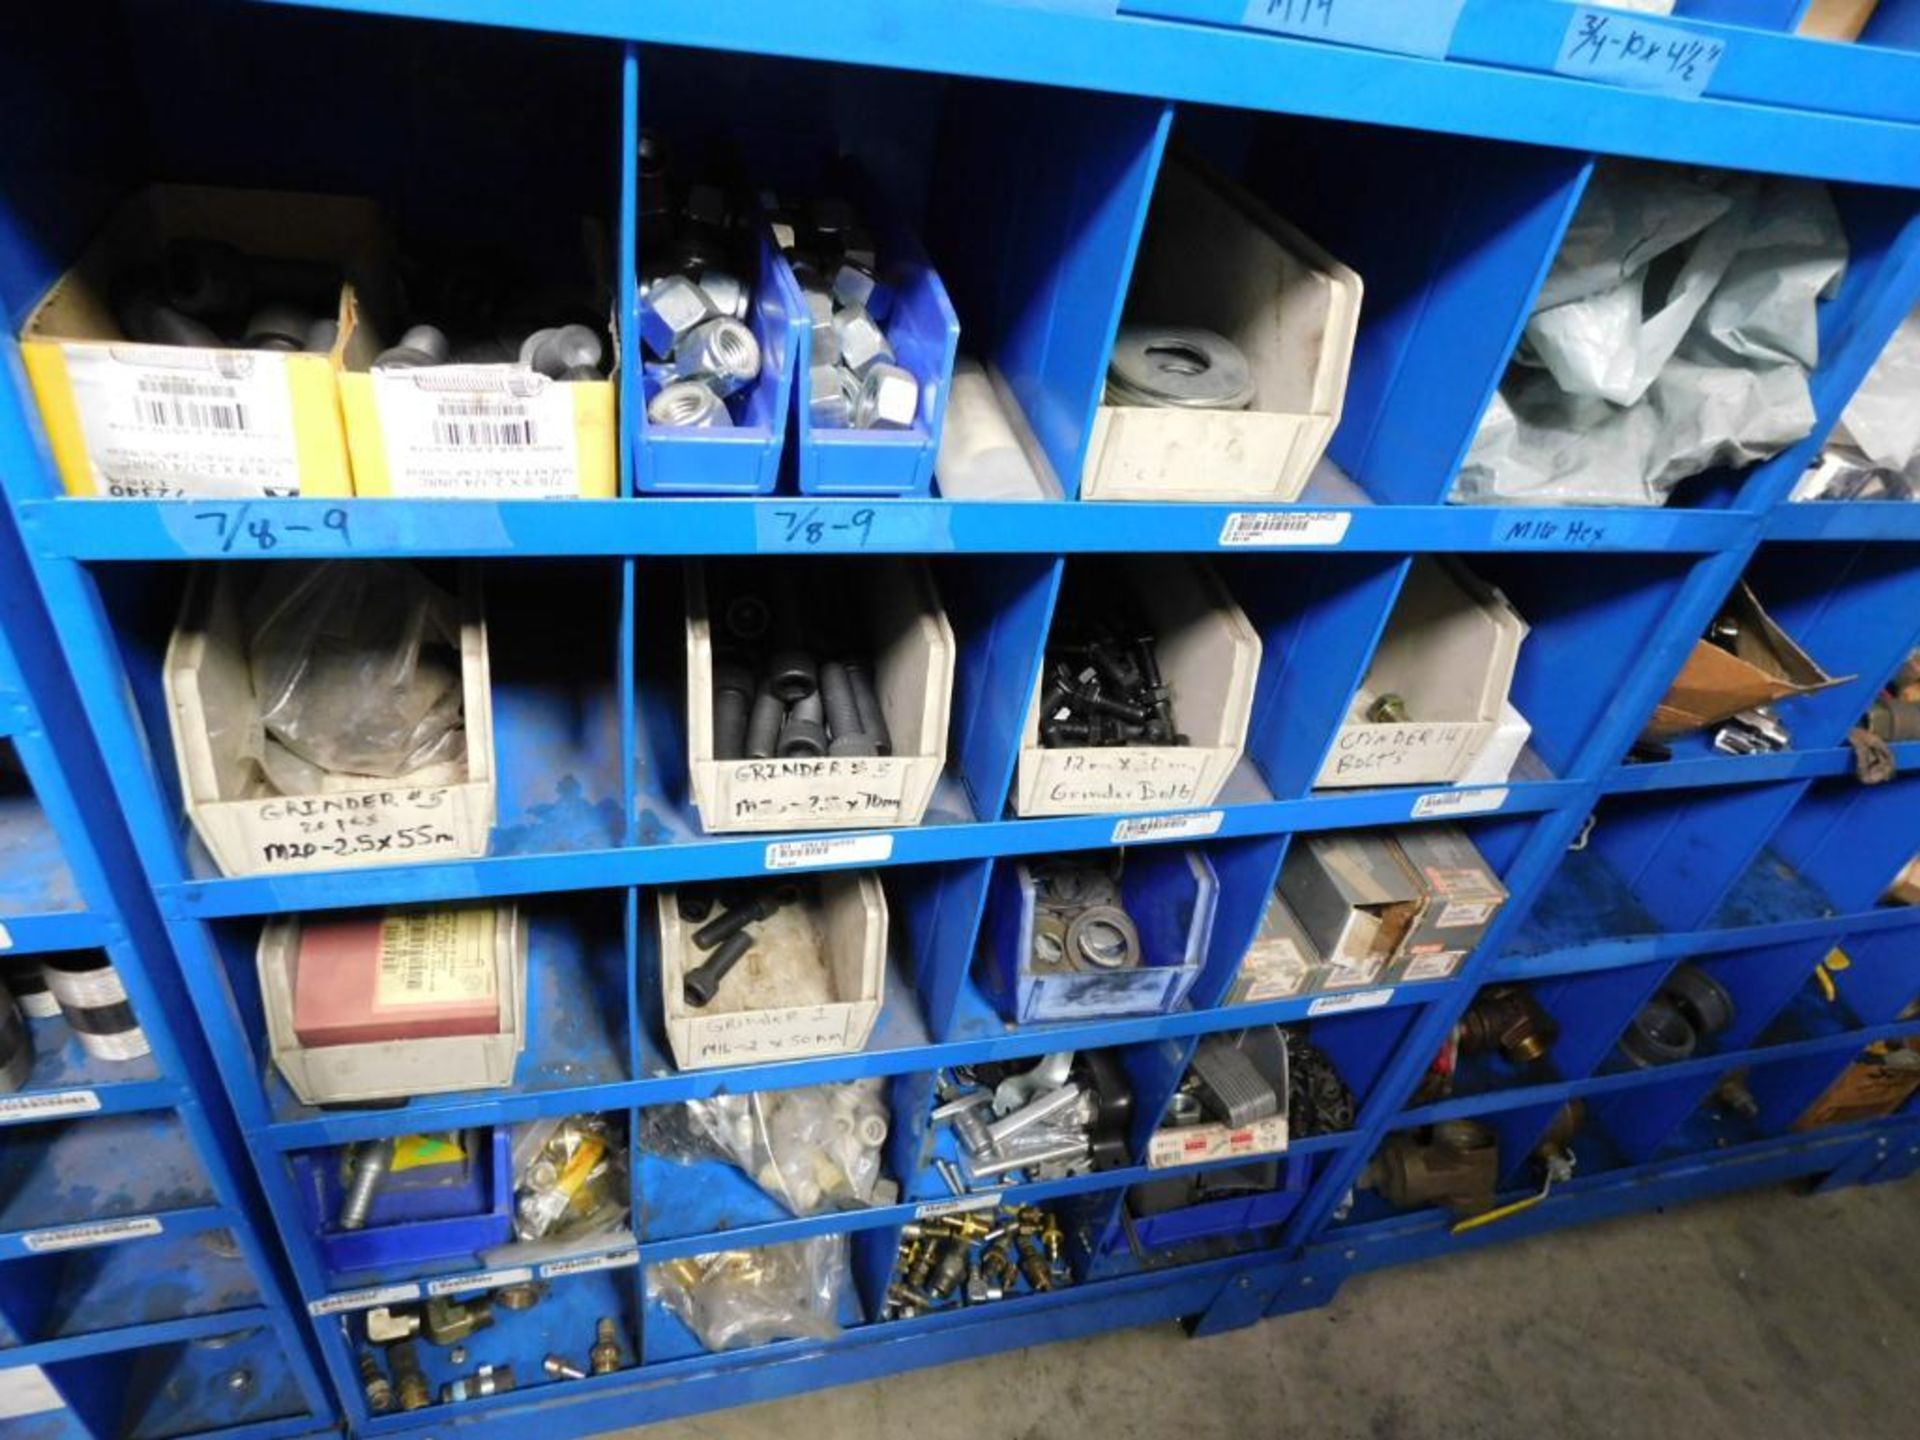 LOT: (7) Sections Fastenal Compartment Organizers w/Contents of Hardware, Plumbing, etc. - Image 8 of 15